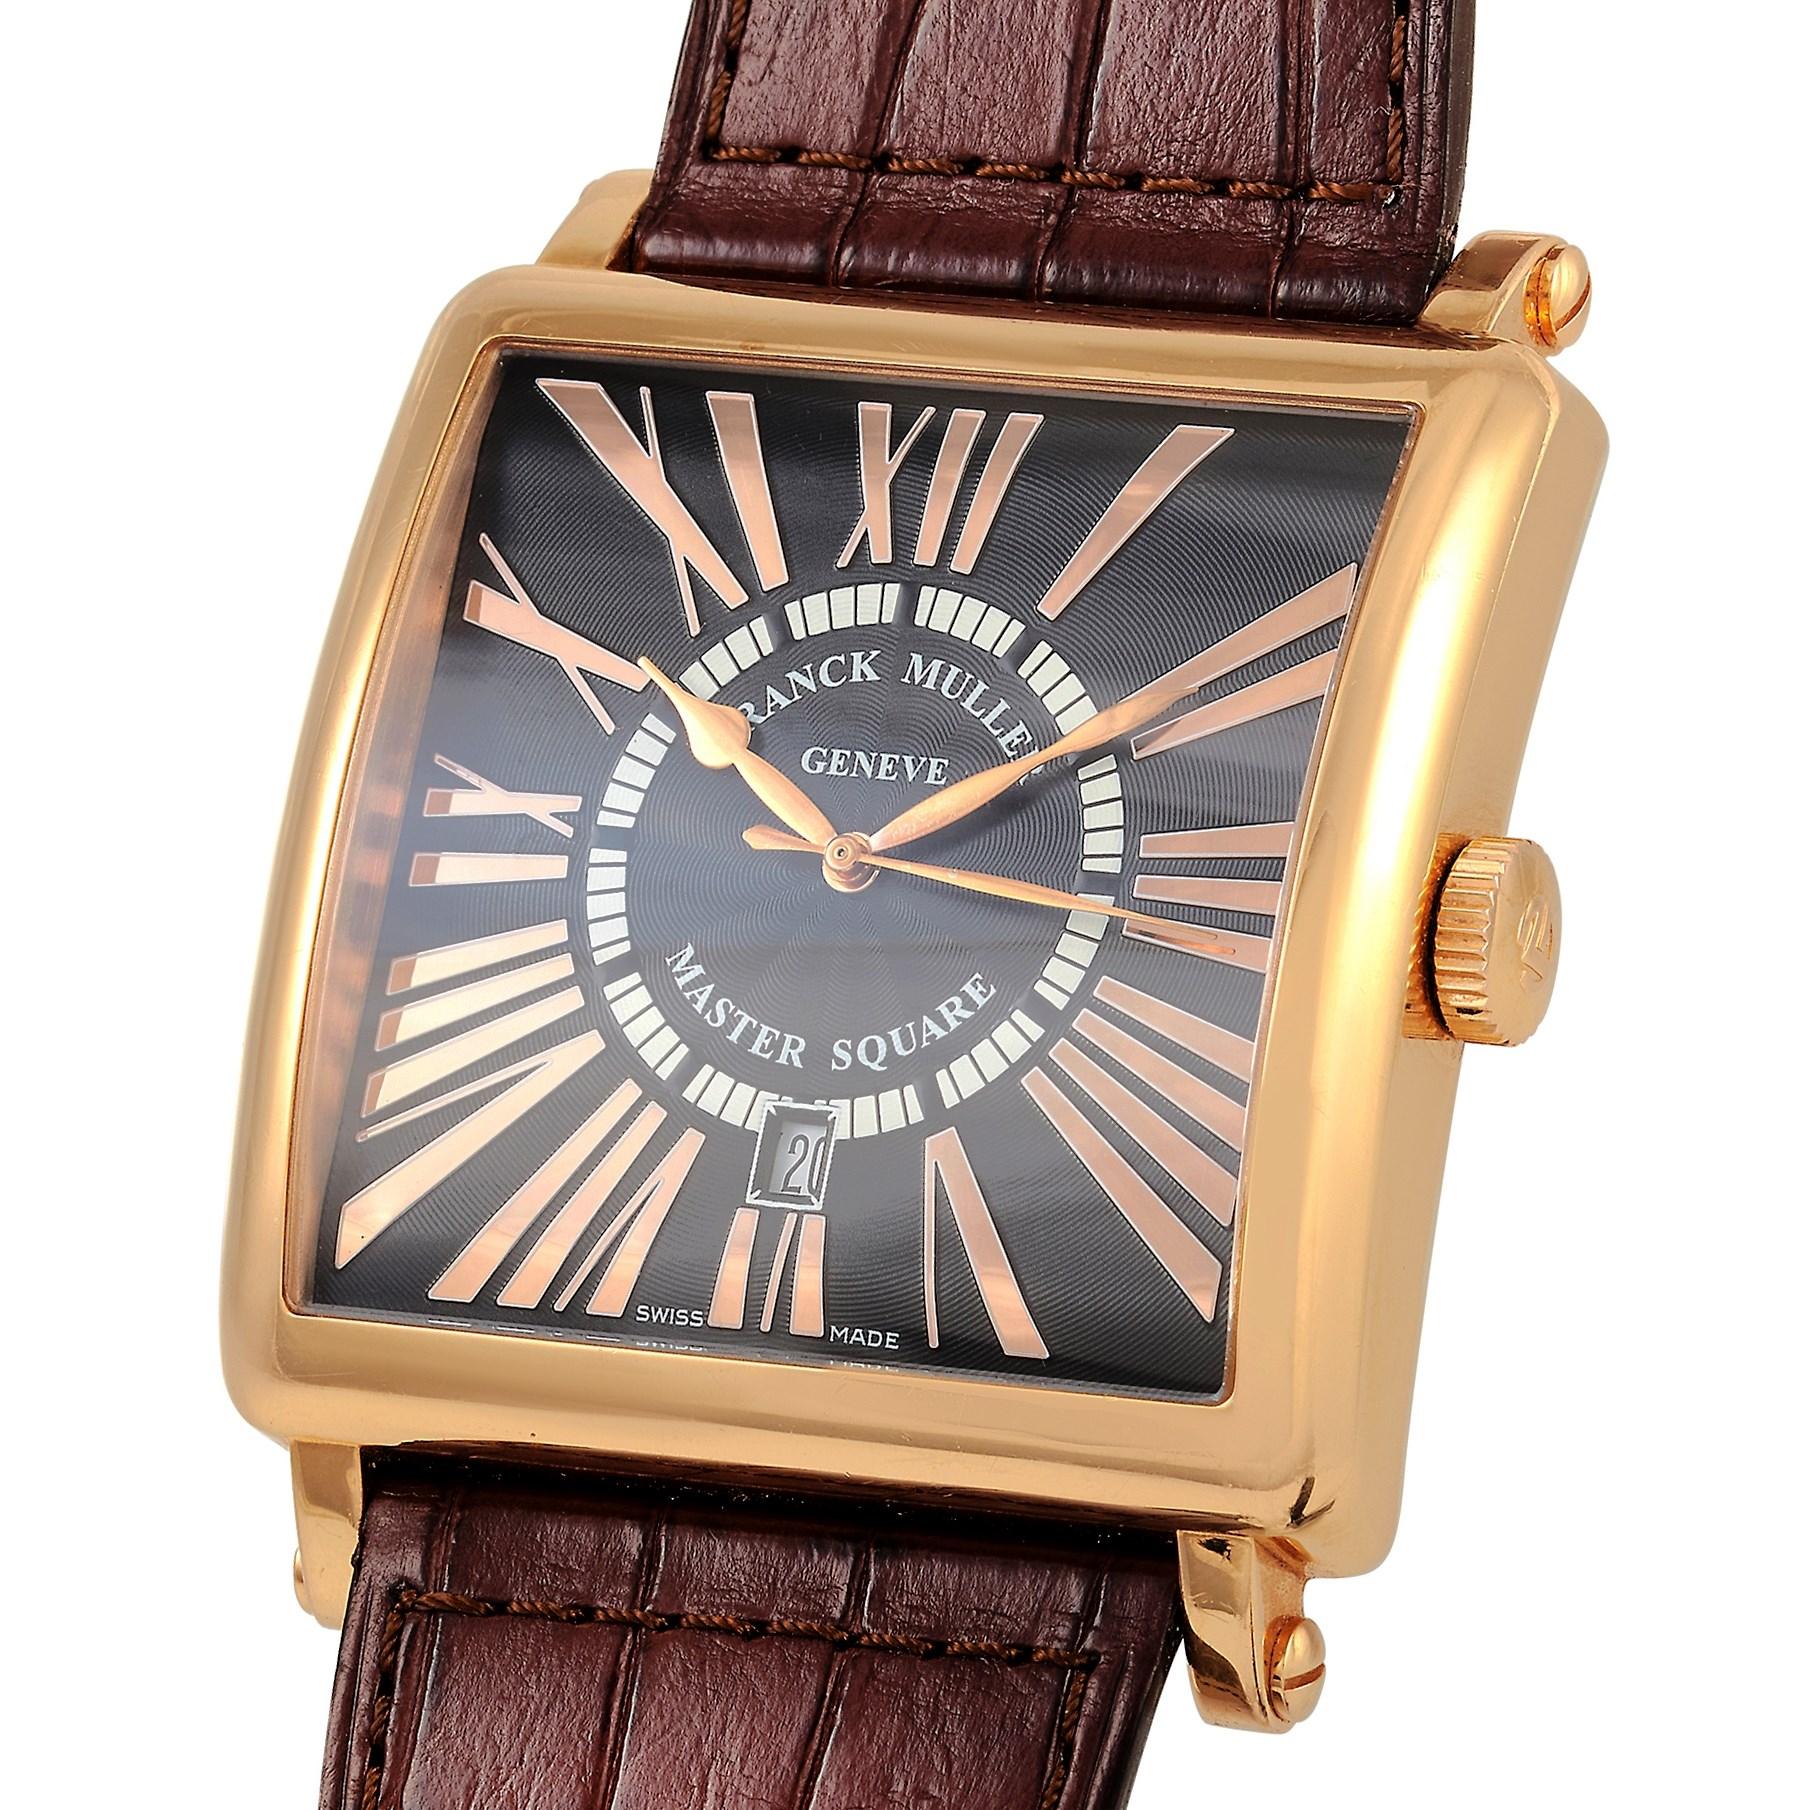 This Franck Muller Master Square Black Dial, reference number 6000 K SC DT, is presented in an 18K Yellow Gold case that measures 42 mm in diameter. The case is set on a brown alligator leather strap with tang closure. The solid case back includes